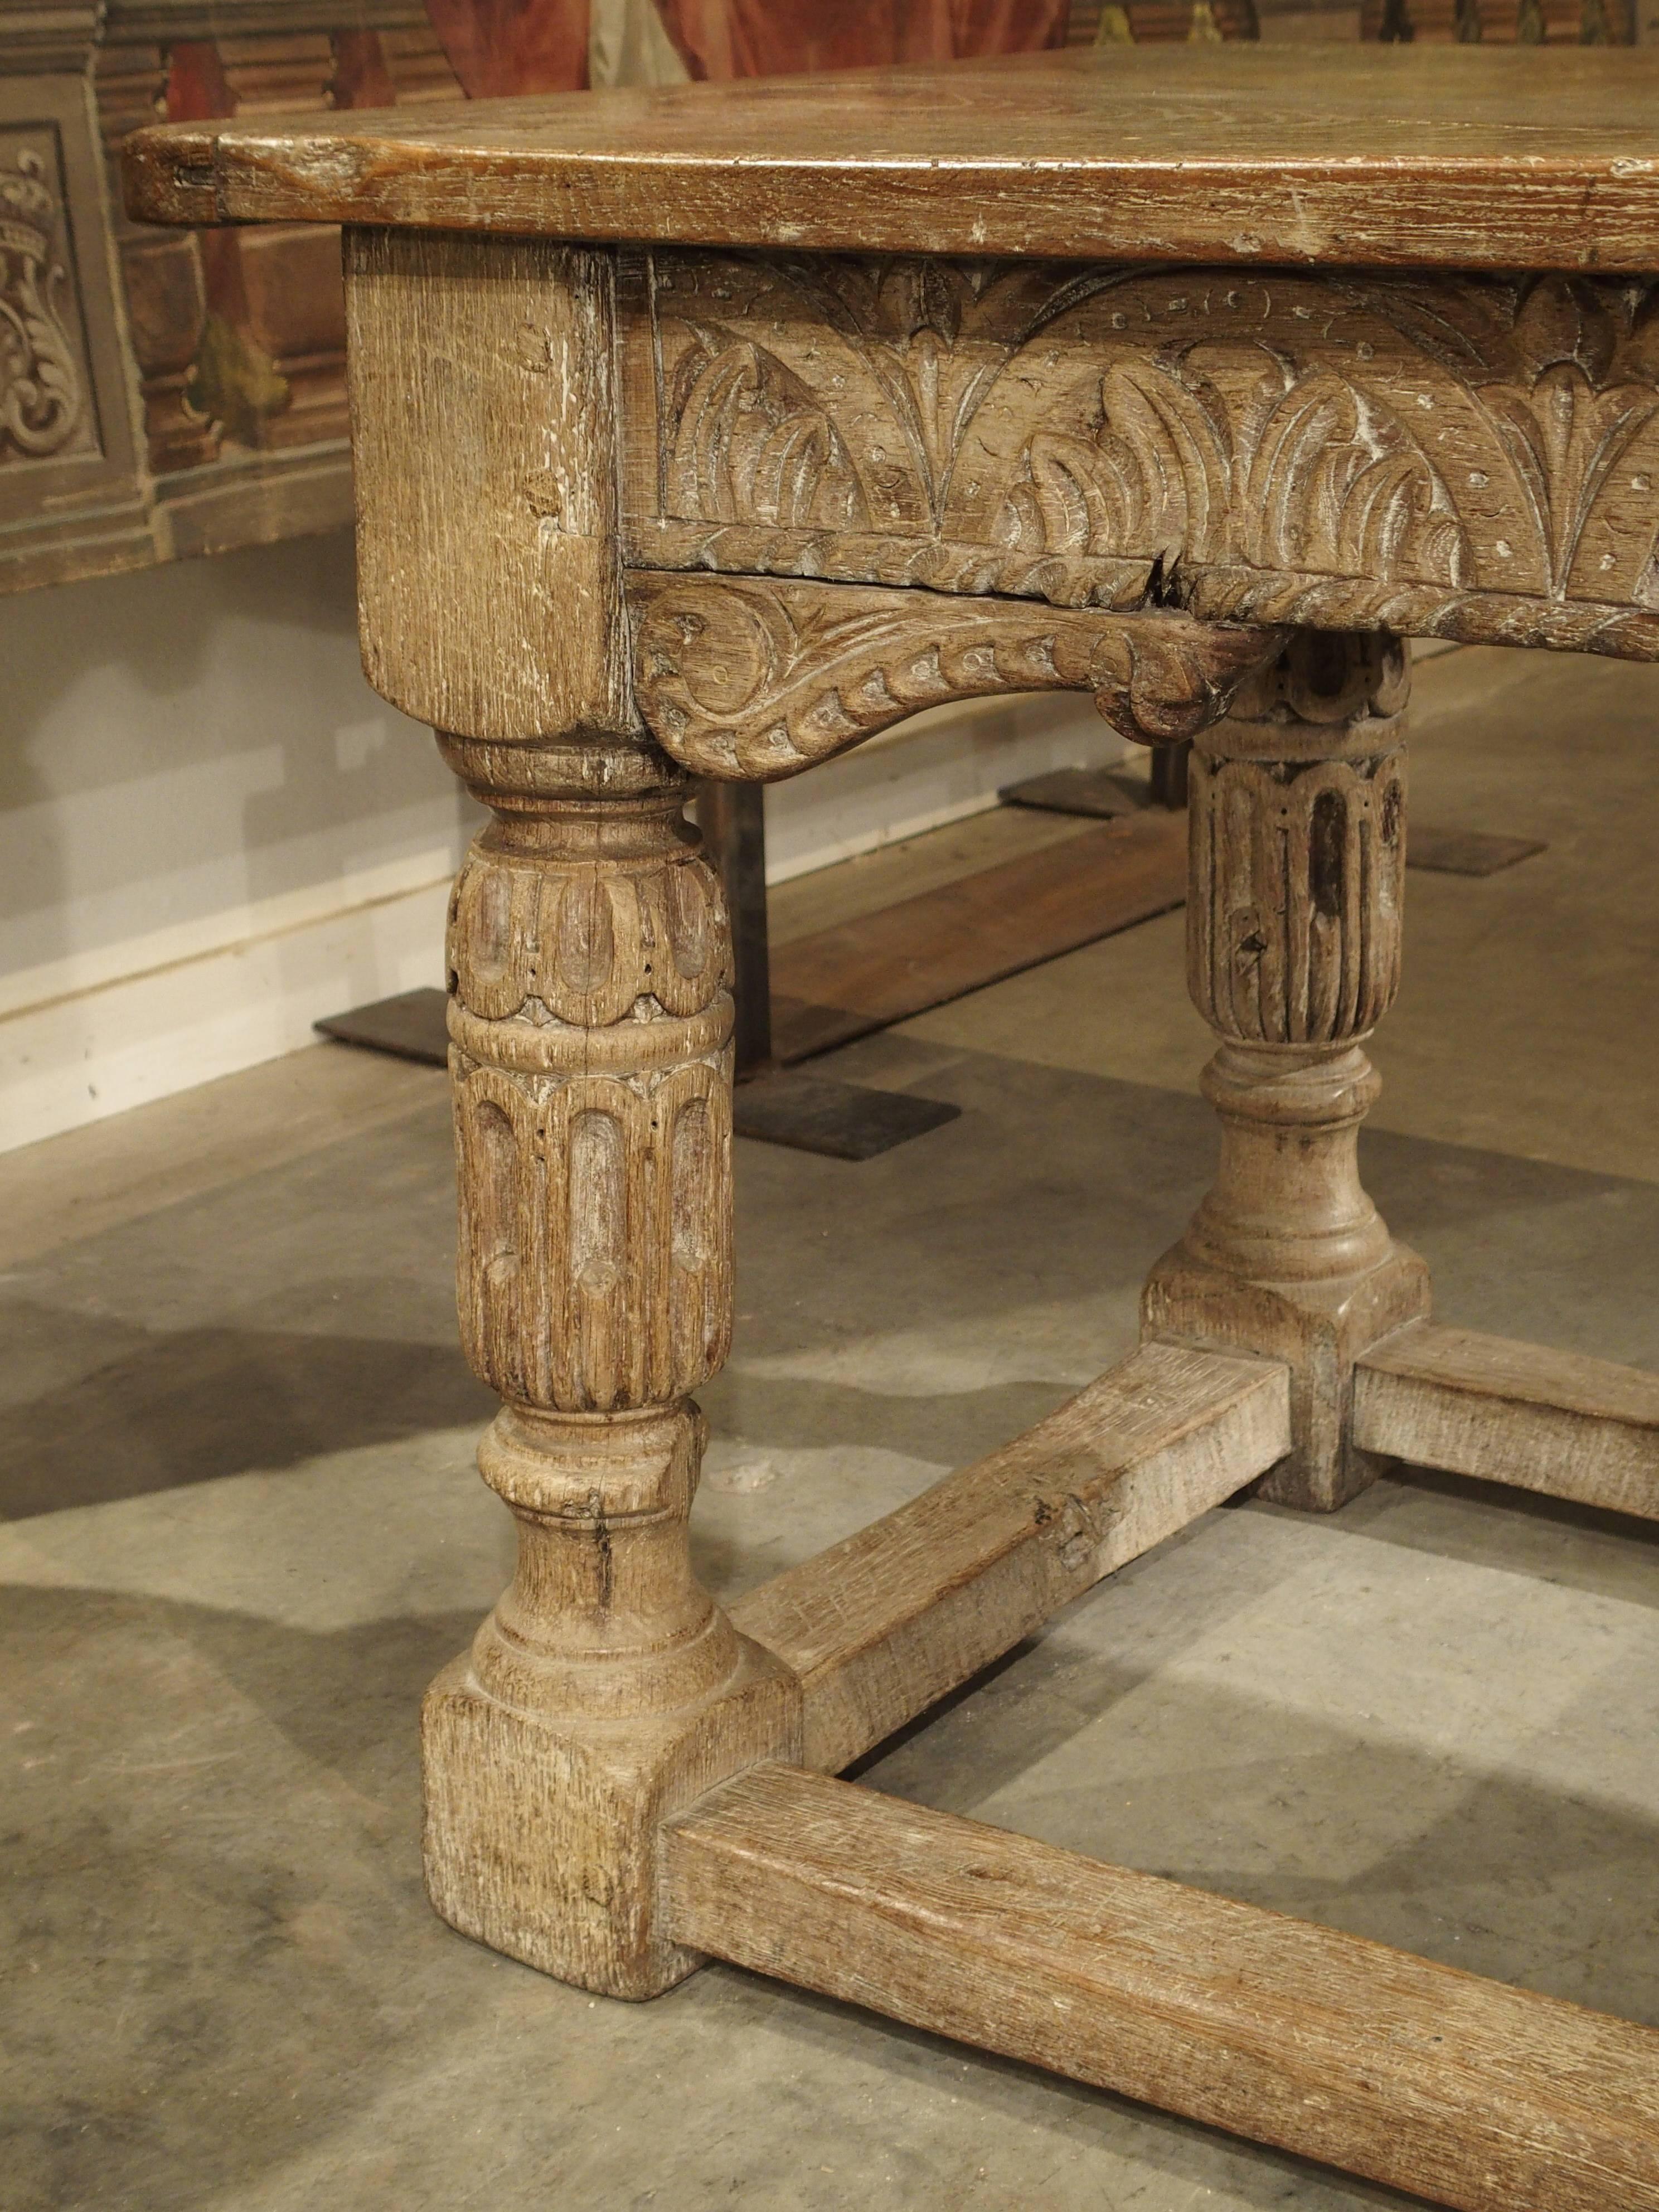 Hand-Carved Antique Whitewashed Oak Table from England, Early 1800s